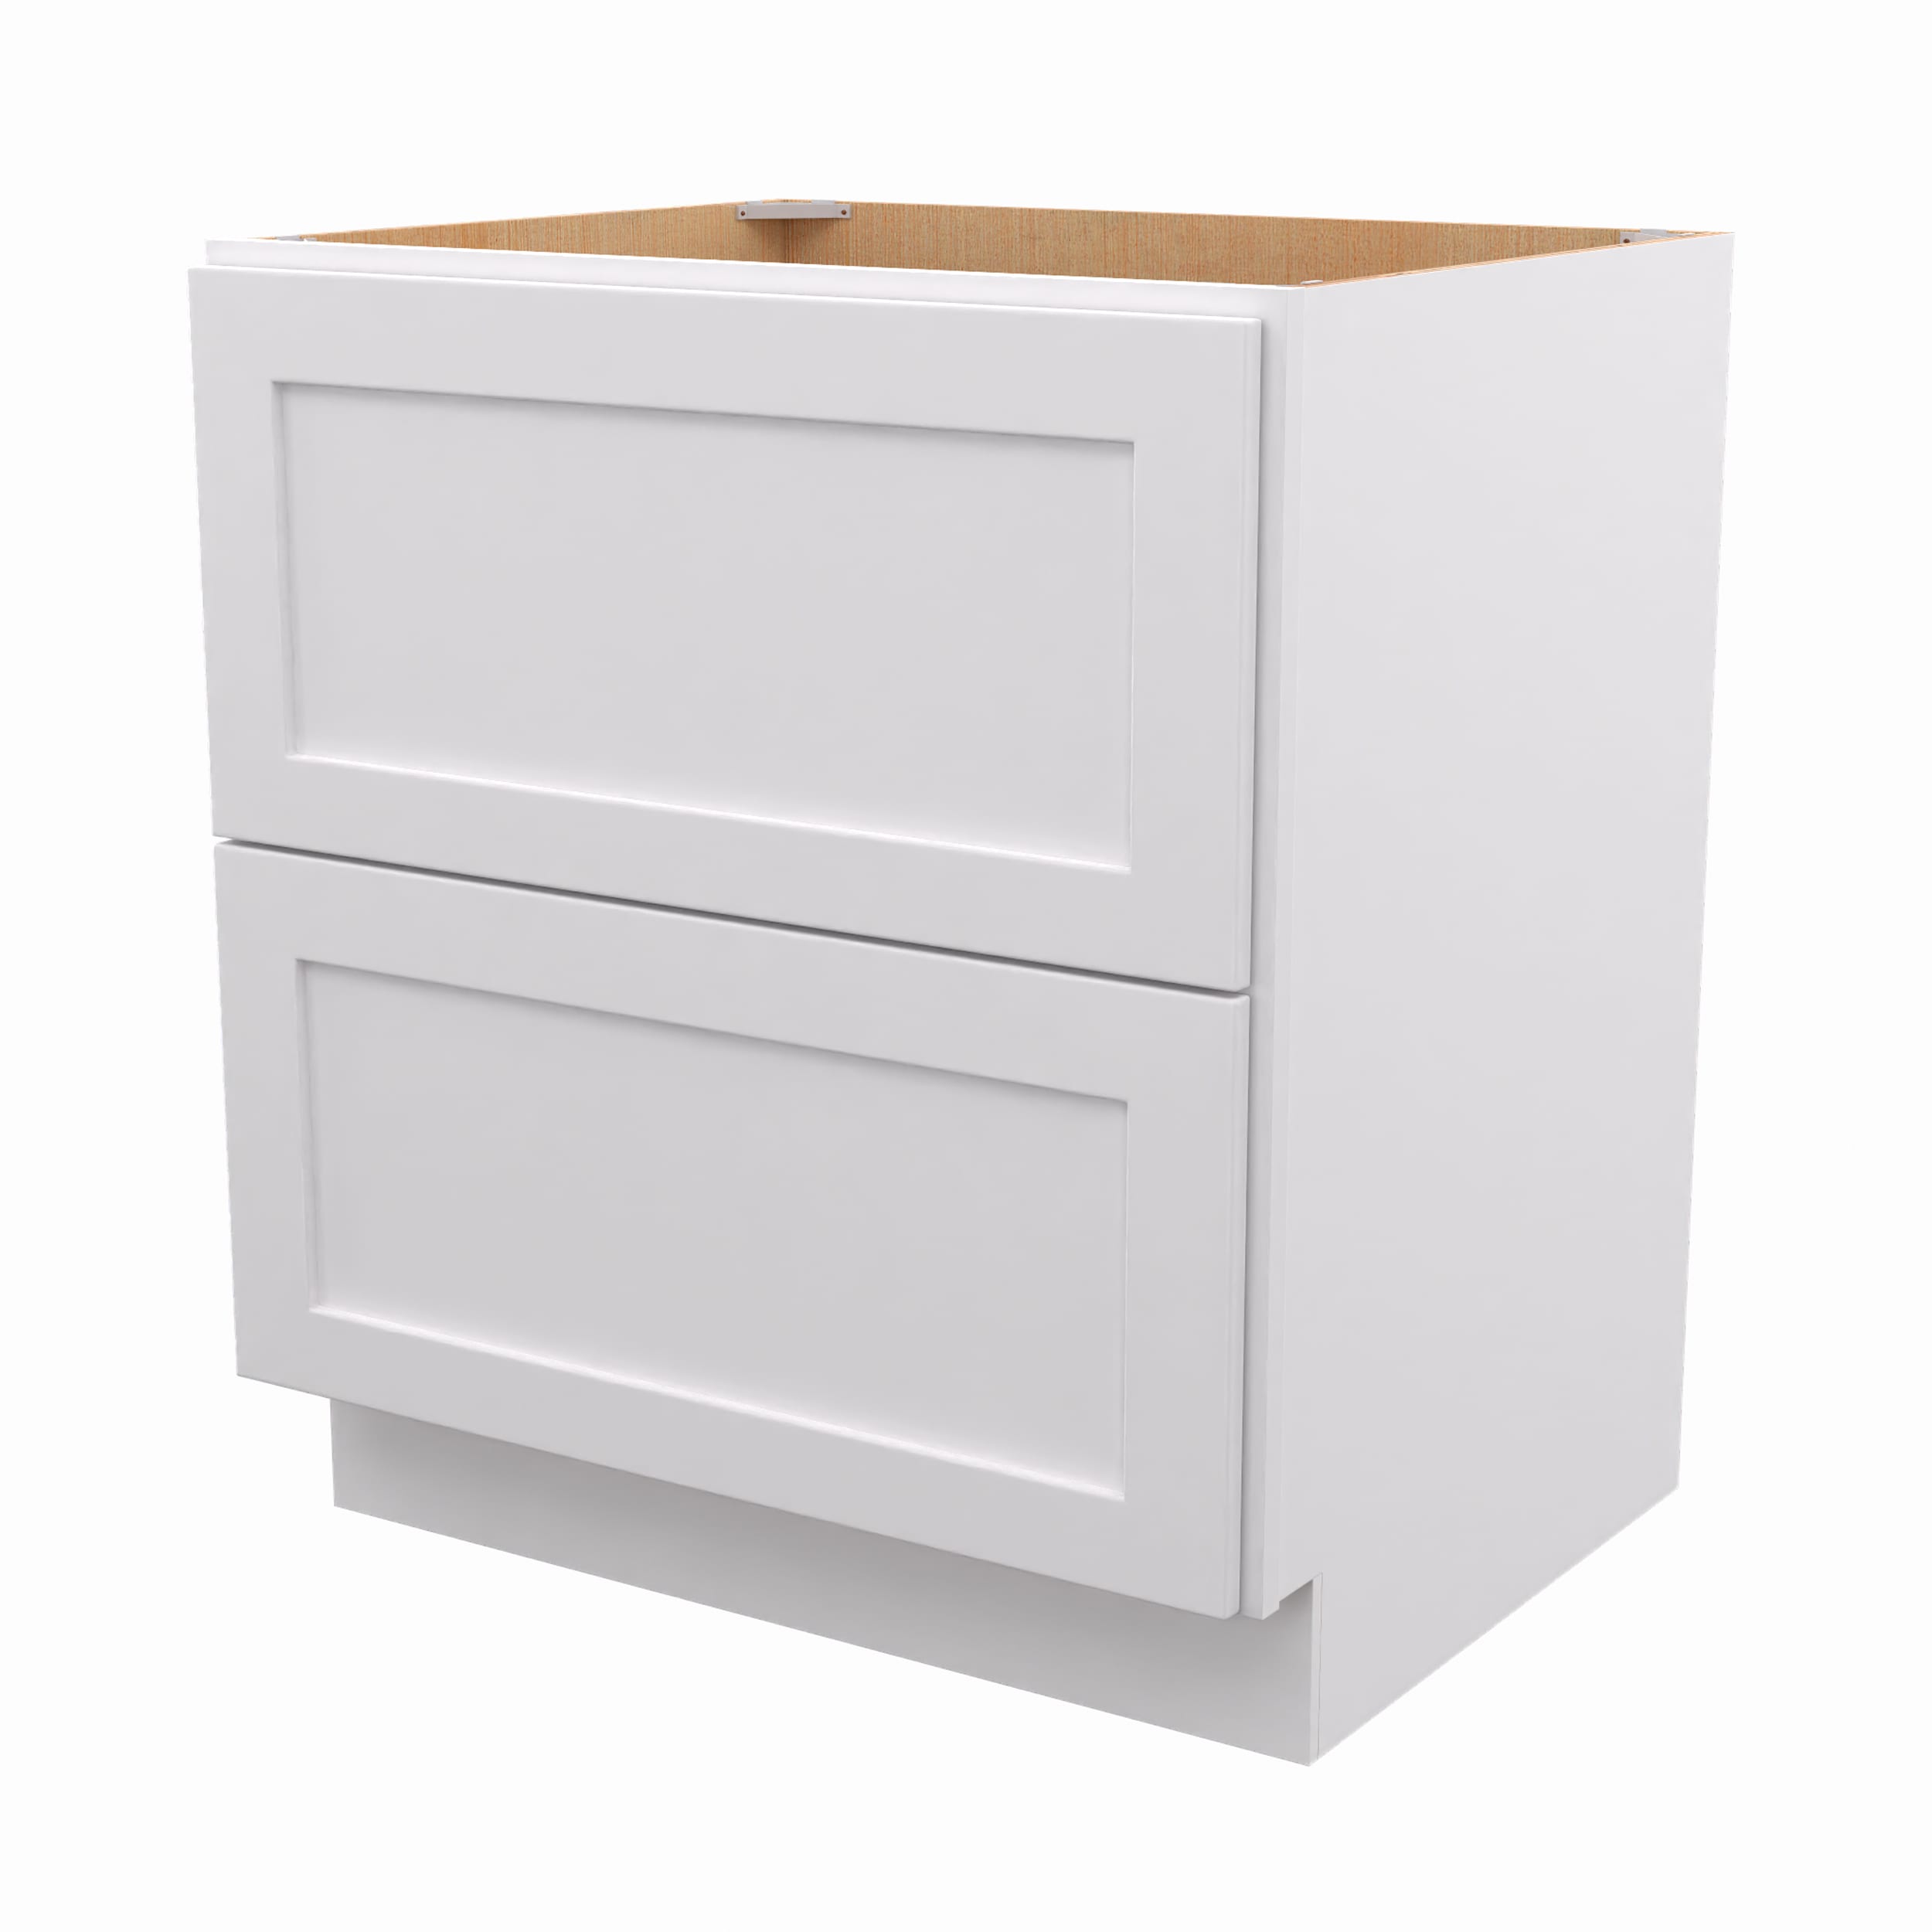 RELIABILT Fairplay 30-in W x 34.5-in H x 24-in D White Drawer Base ...